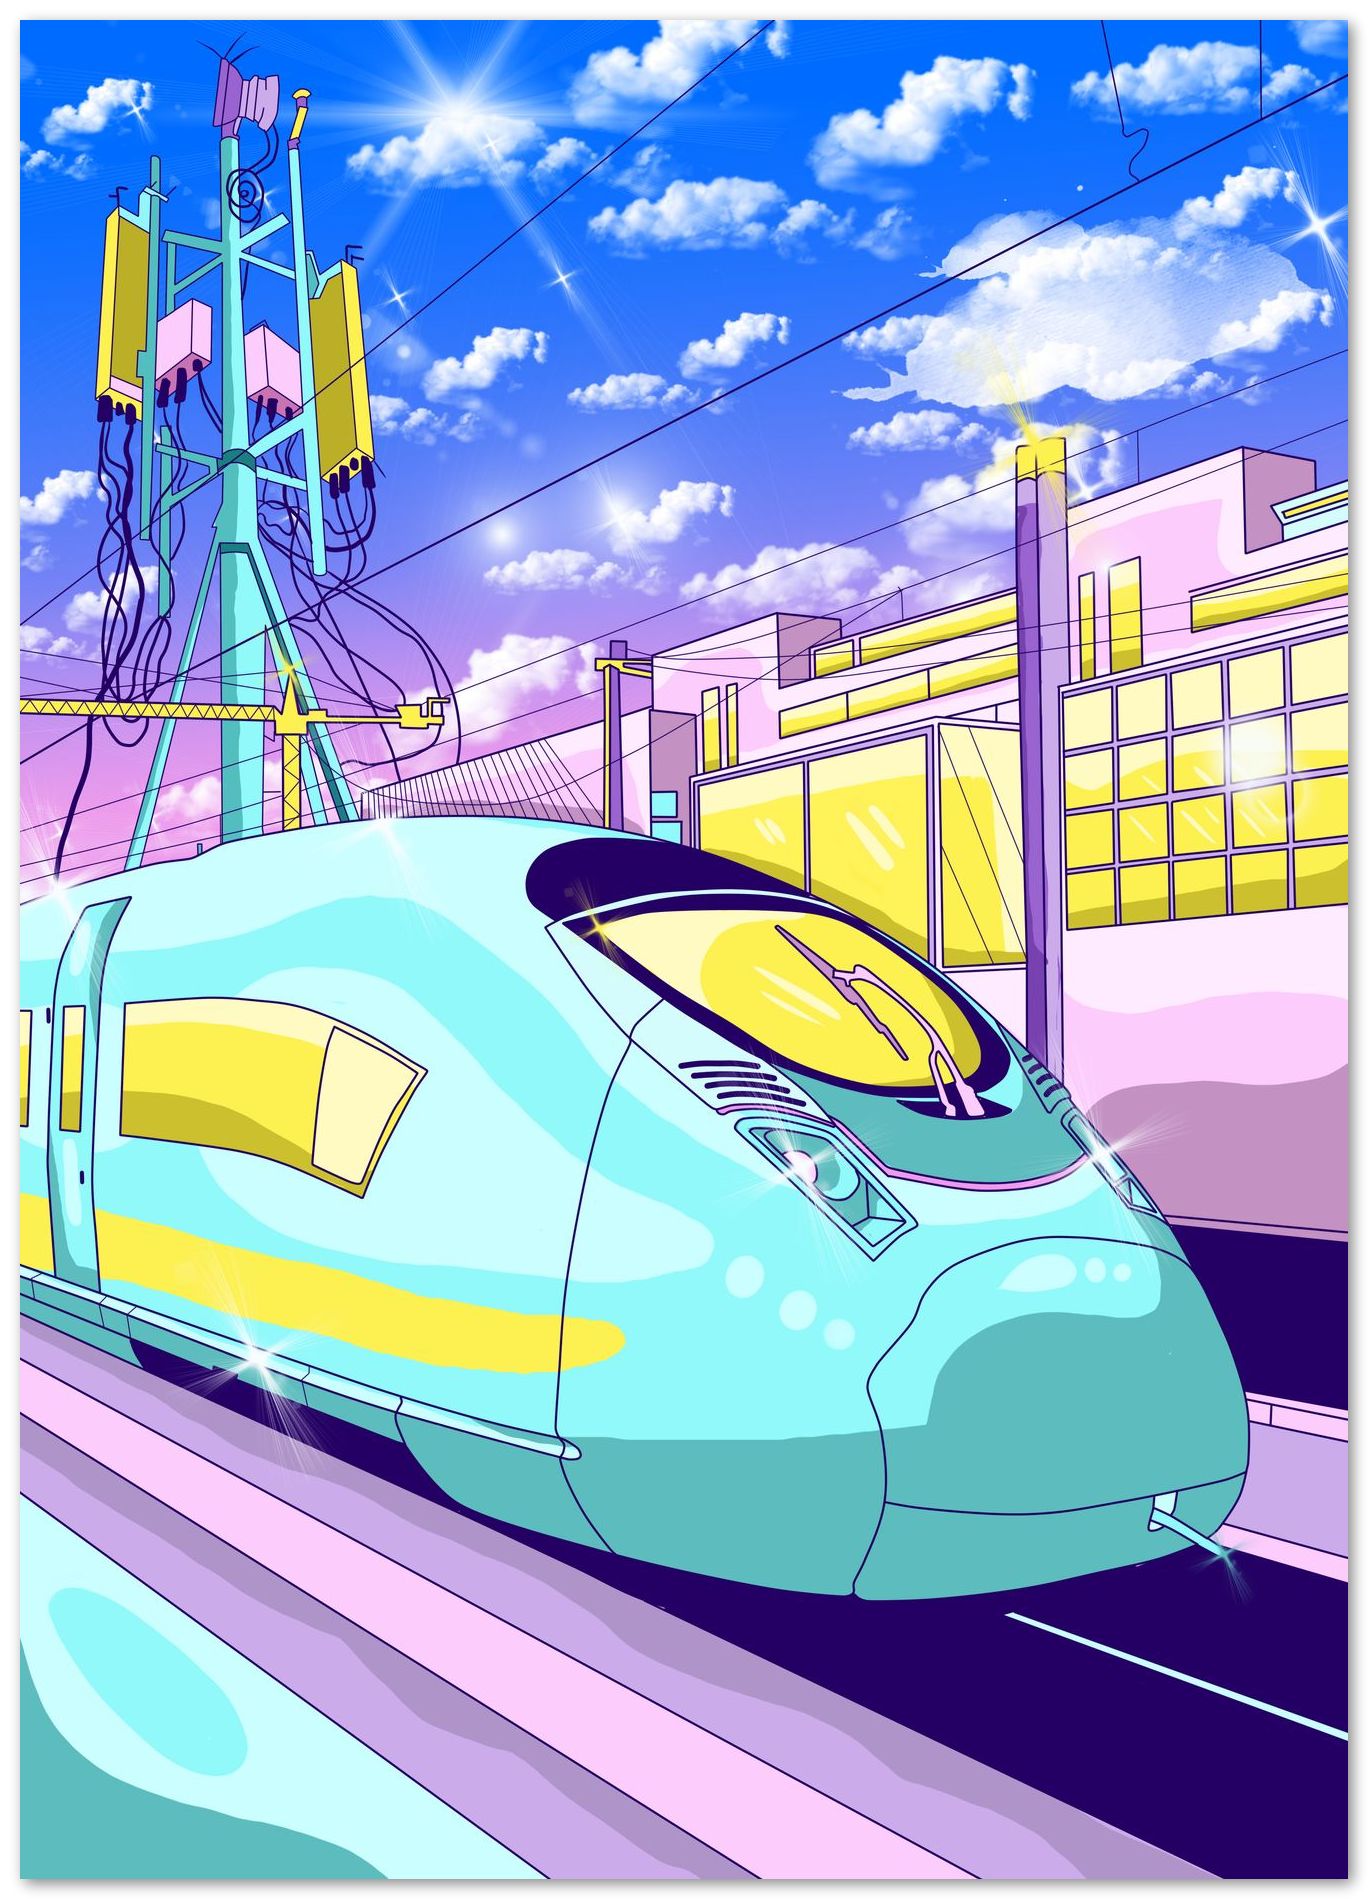 speed train with electric energy - @beautifulday